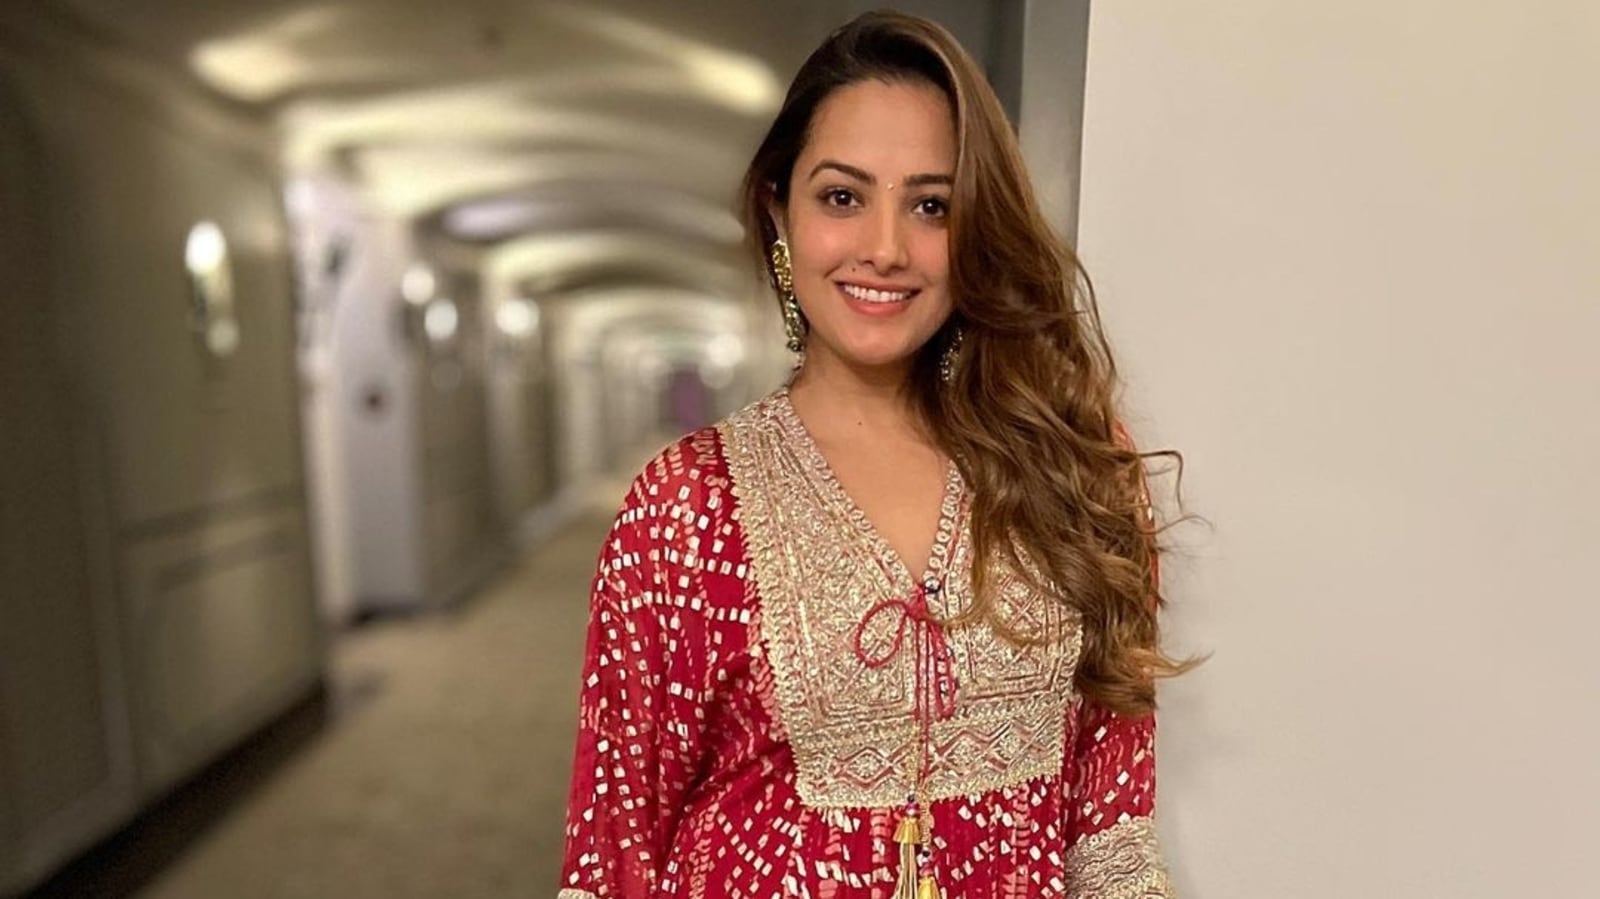 Naagin star Anita Hassanandani's ethnic red kaftan is our new fashion favourite | Trends - Hindustan Times